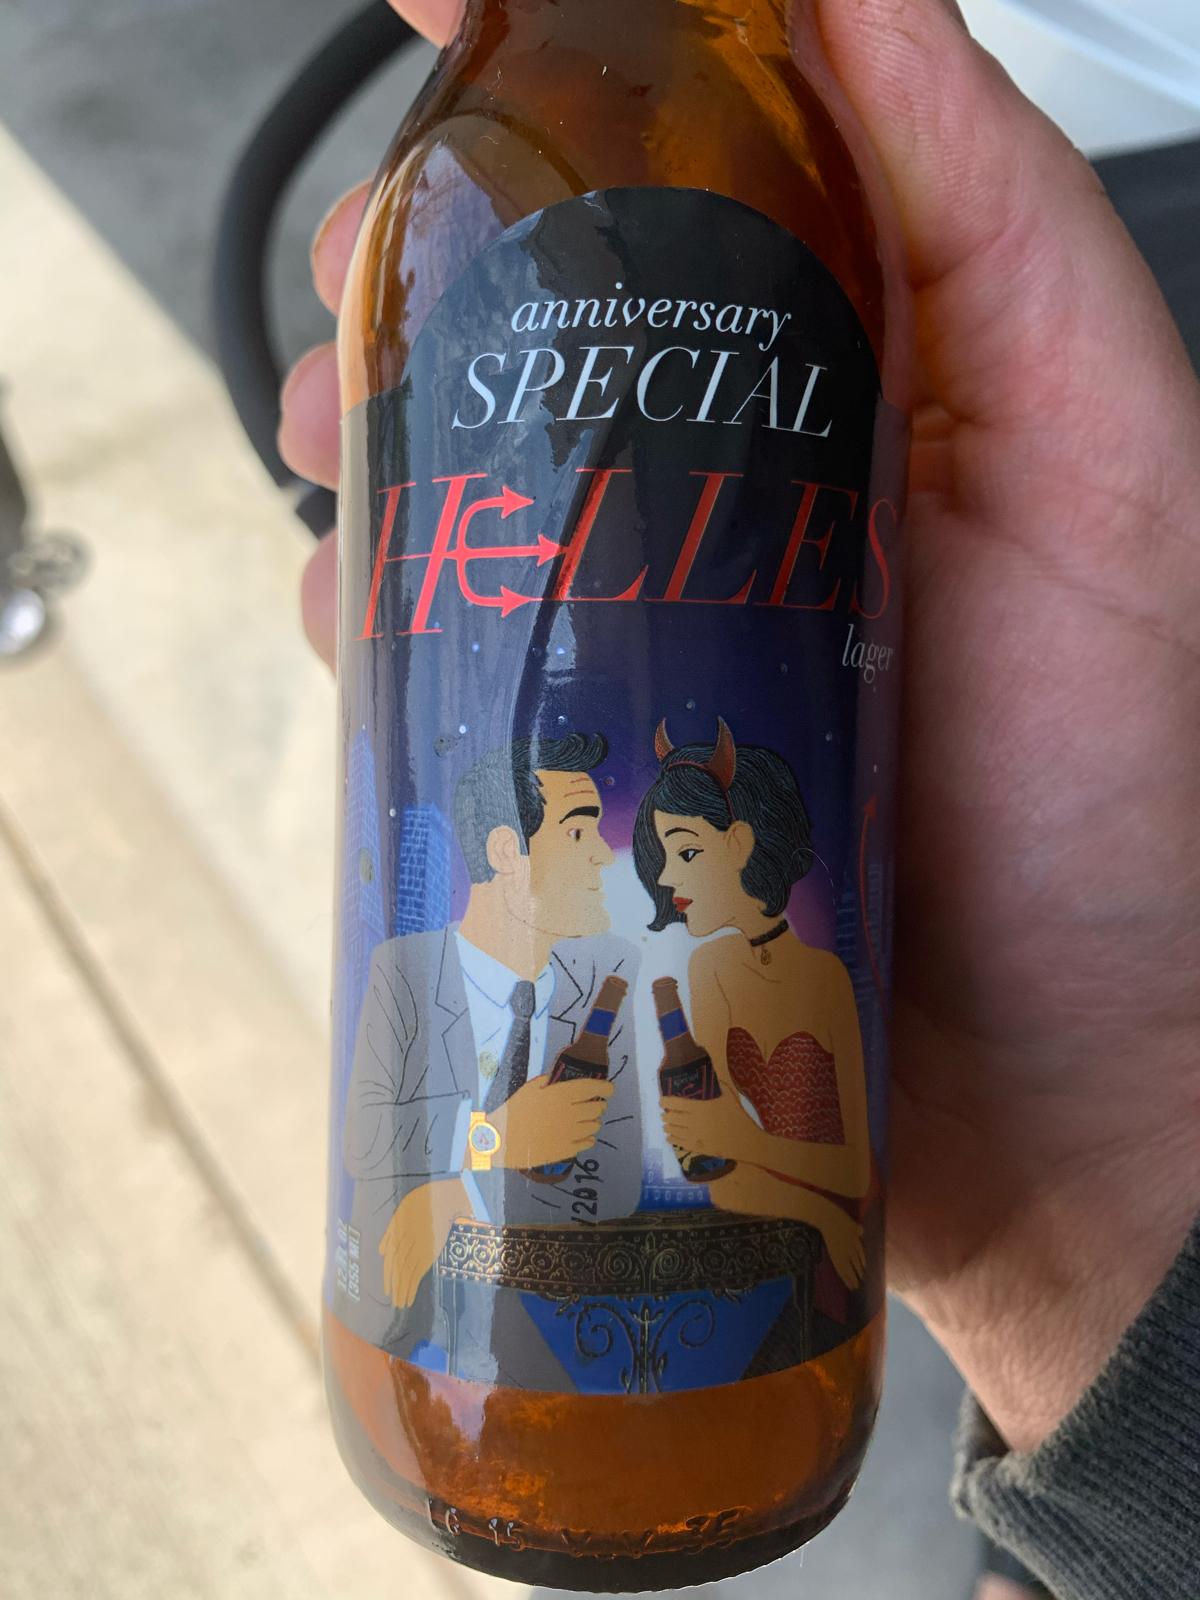 Anniversary Special Hell